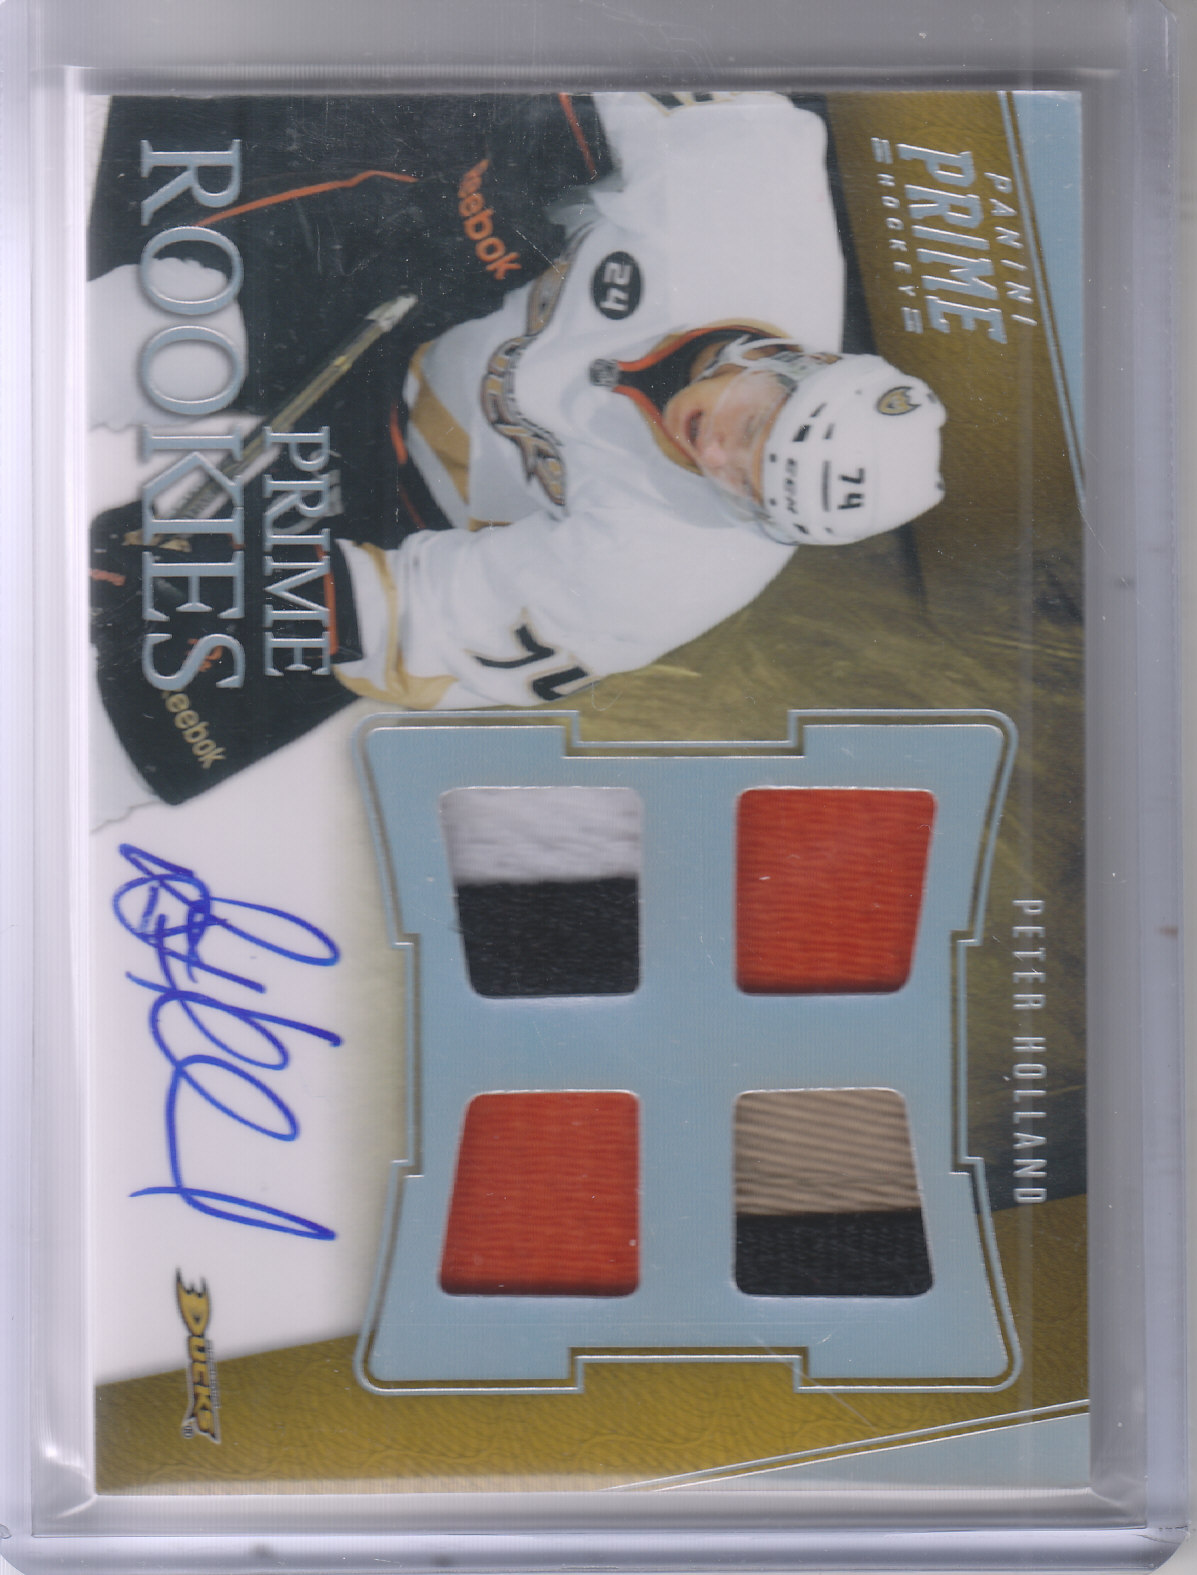 2011-12 Panini Prime Rookies Holosilver Patch Autographs #102 Peter Holland